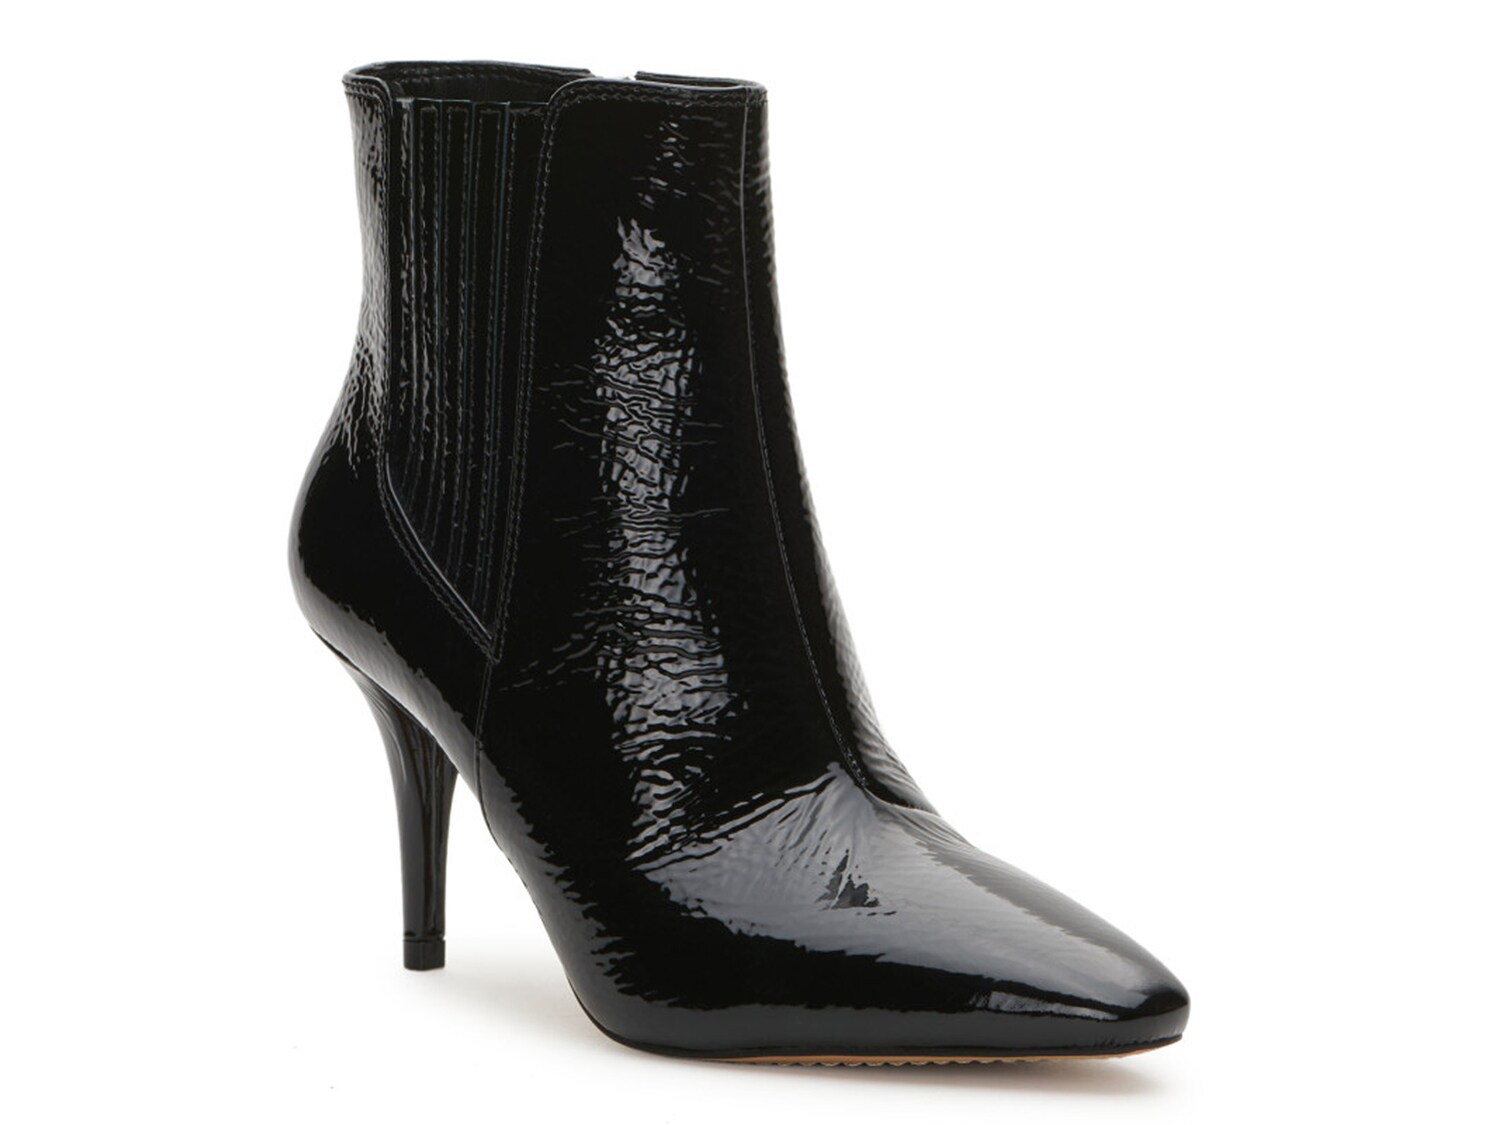 Vince Camuto Ambind 4 Bootie